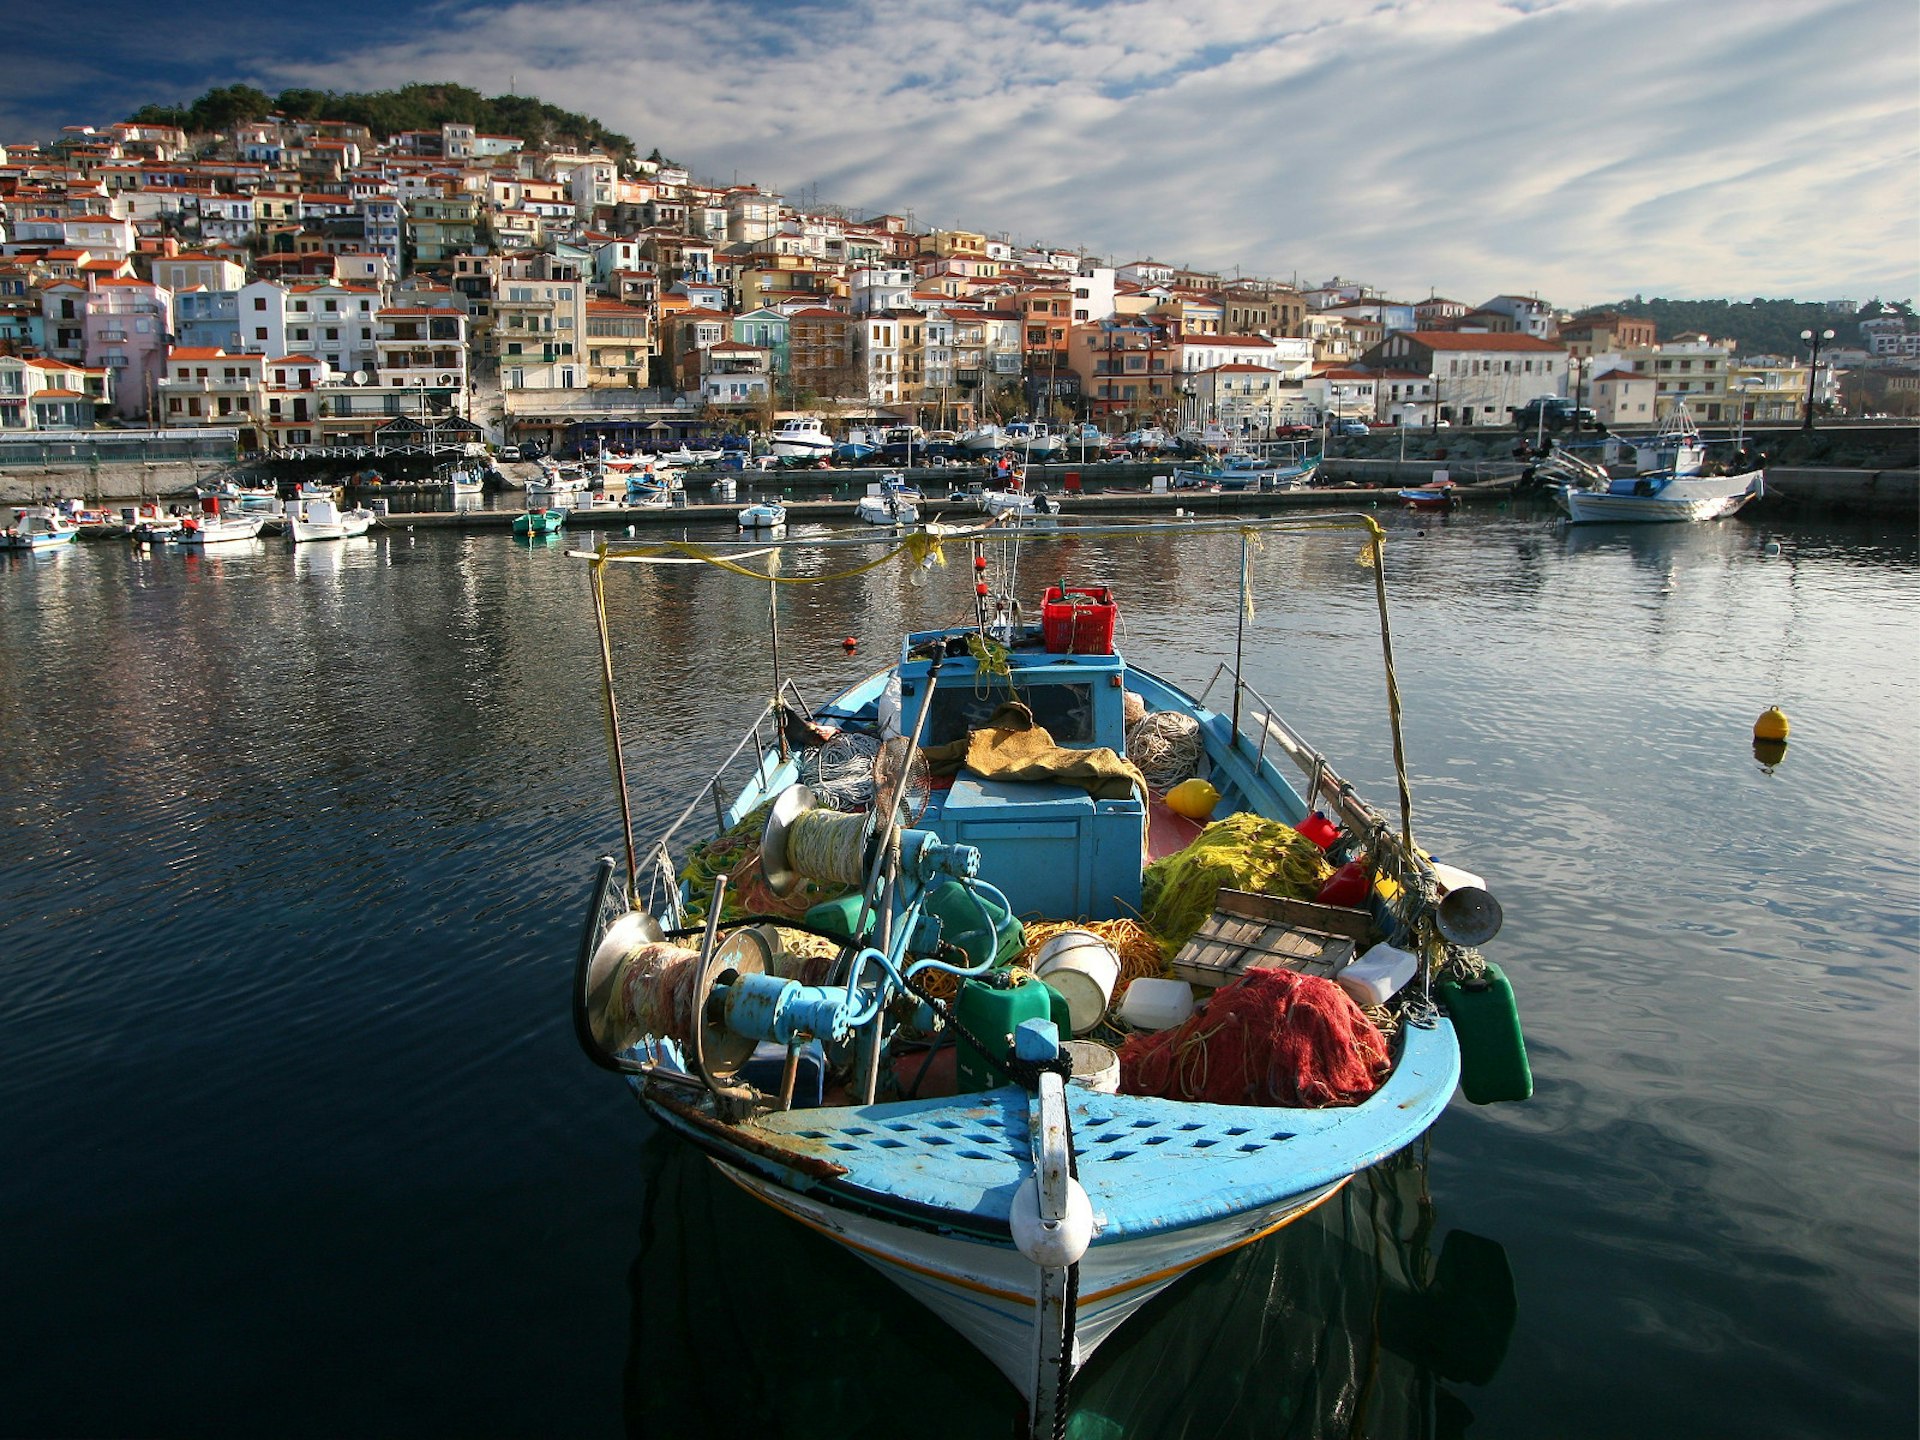 A fishing boat laden with nets lolls in the harbour on the island of Lesvos © Tan Yilmaz / Getty Images